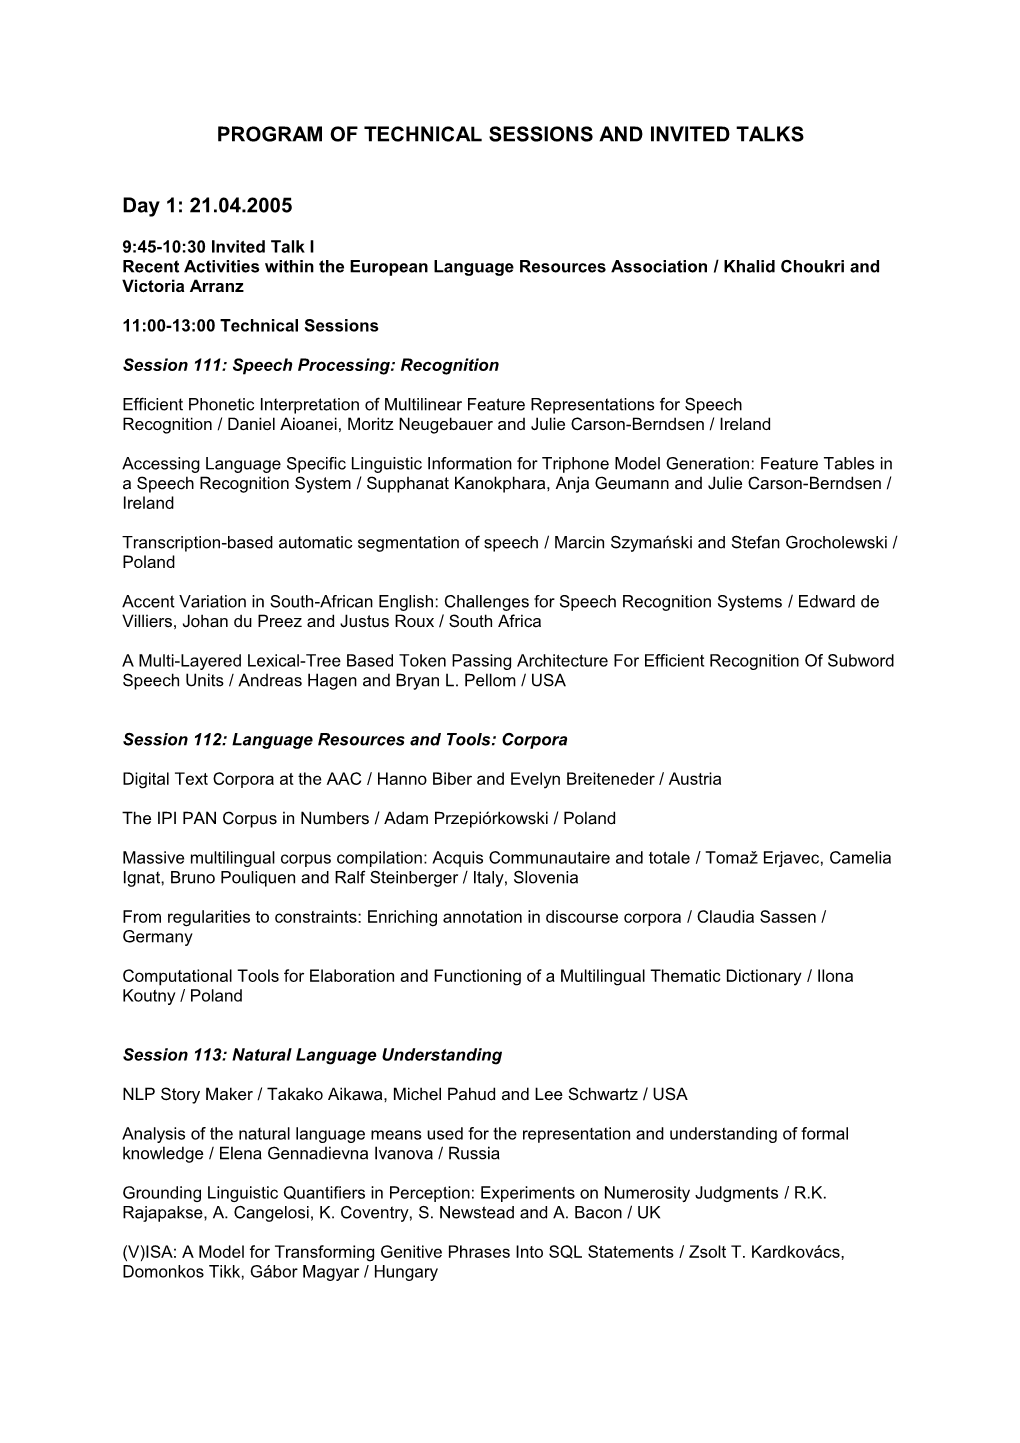 Program of Technical Sessions and Invited Talks